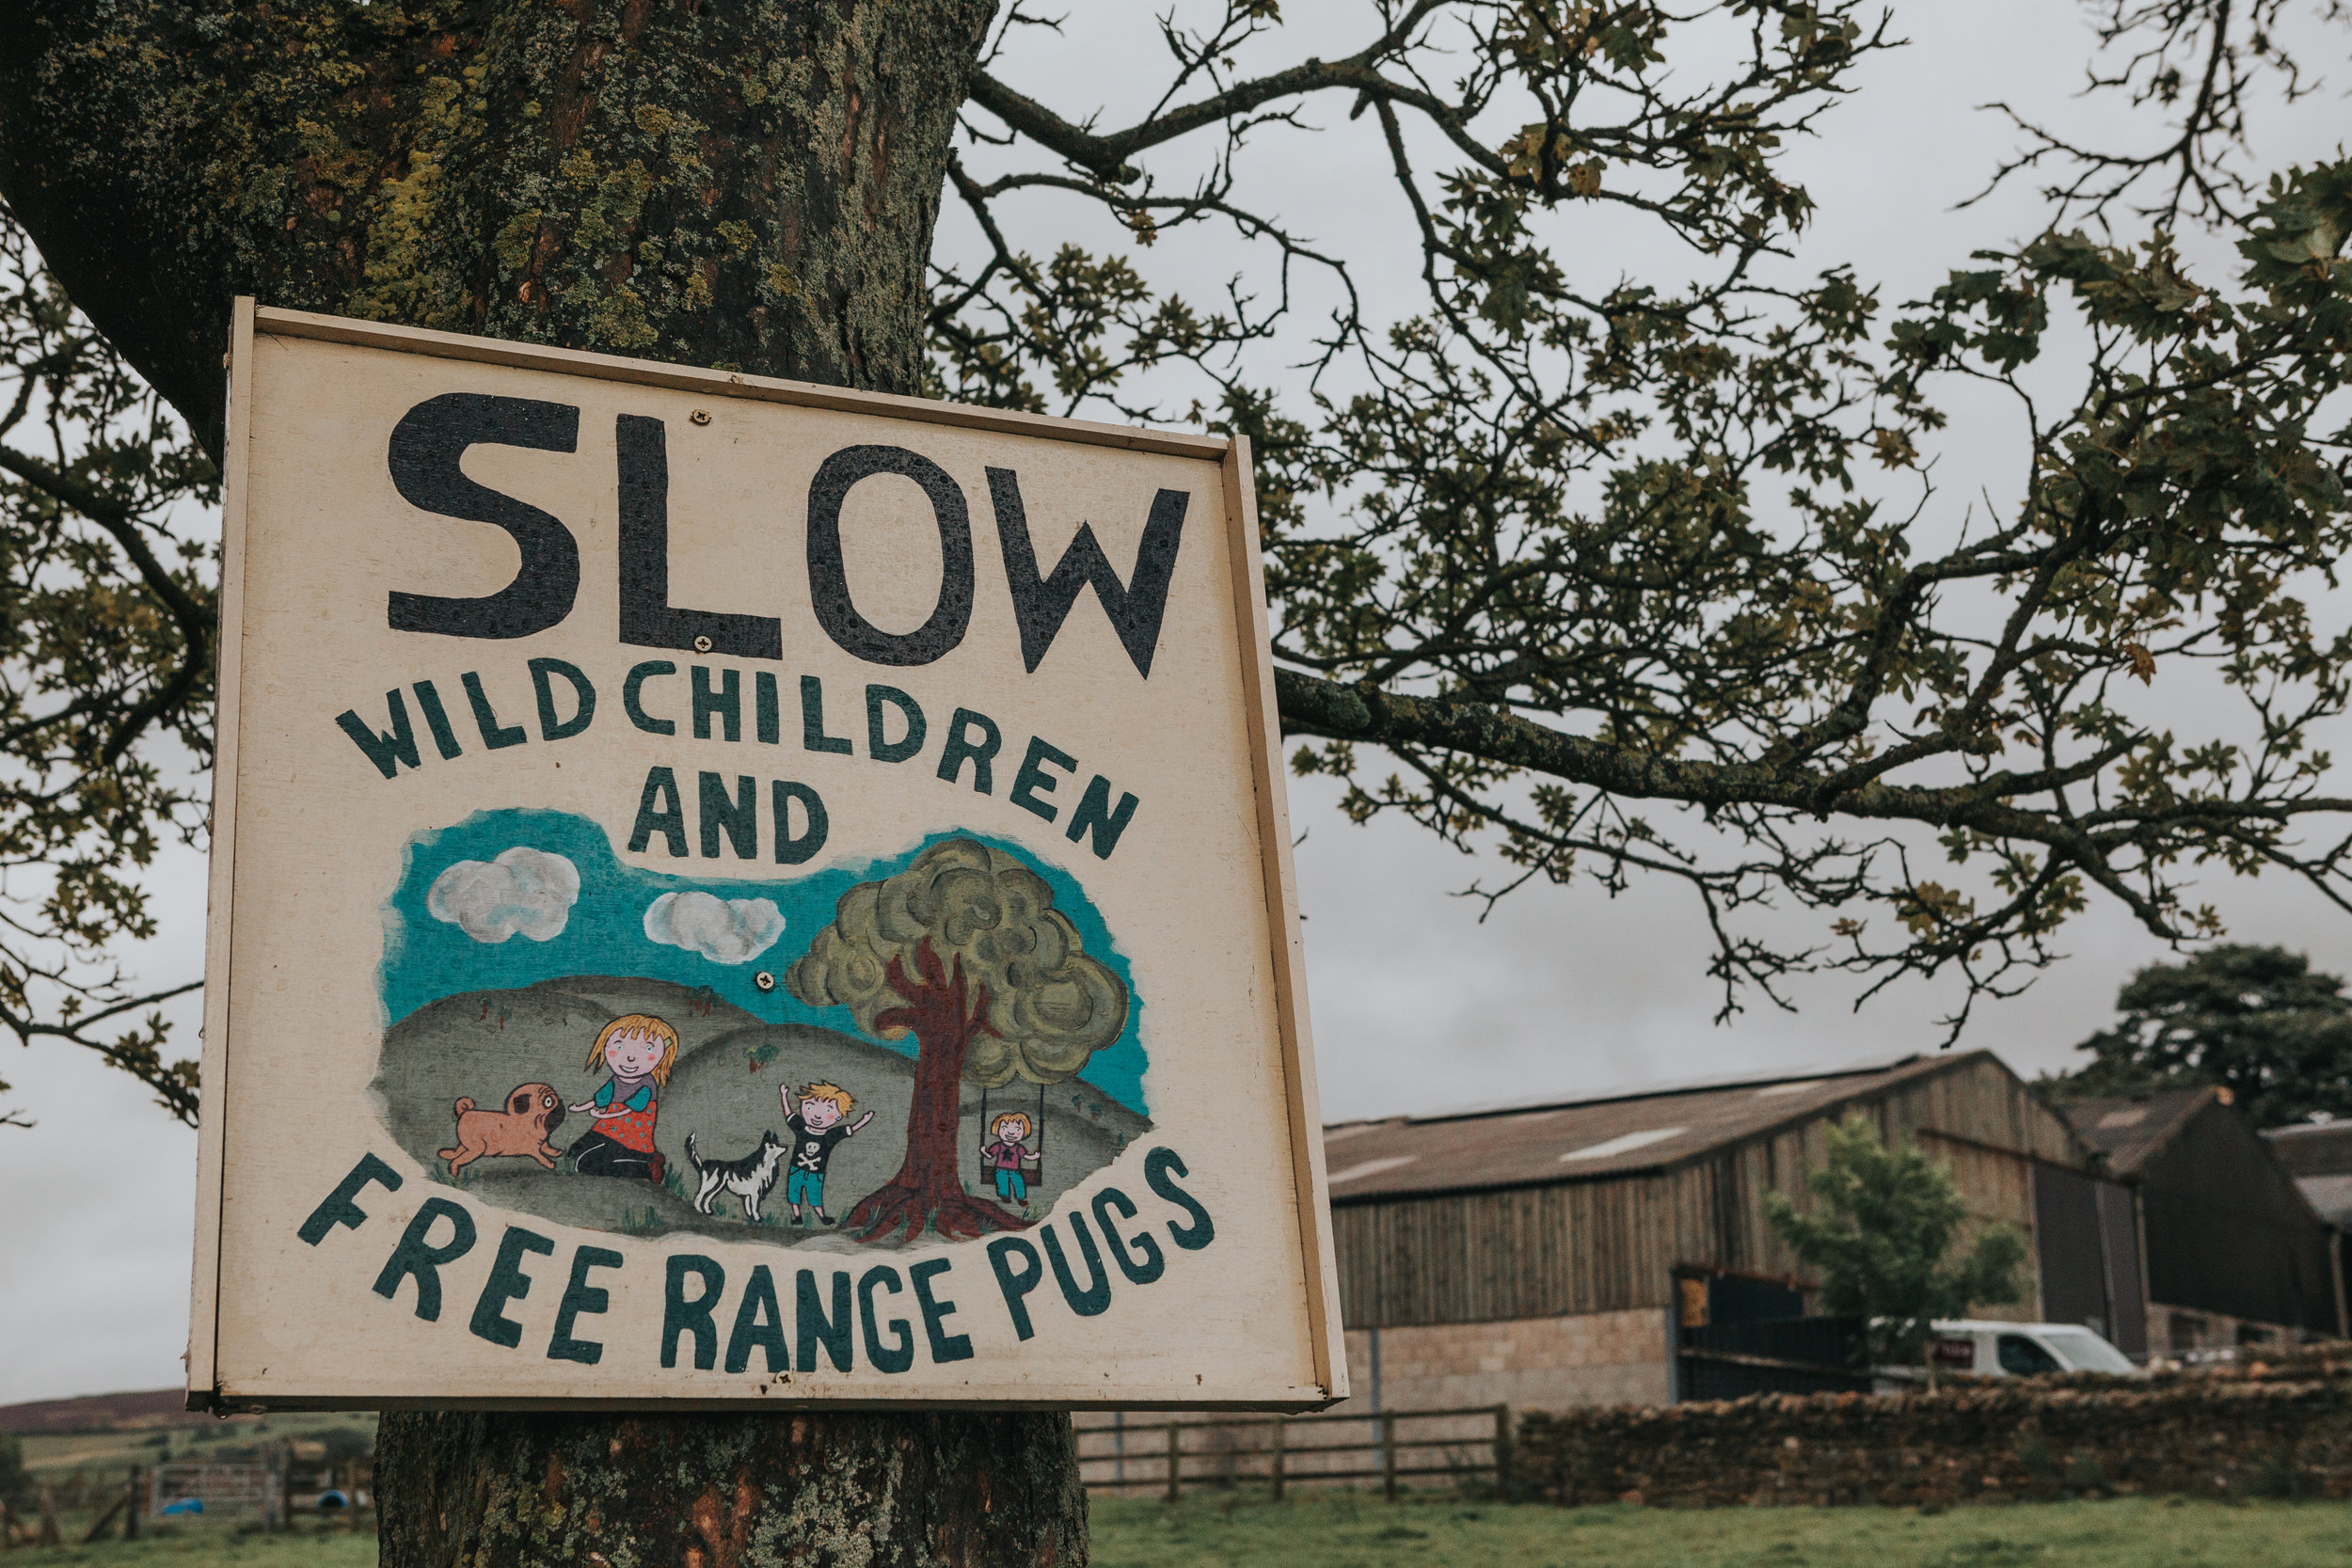  Sign reads "SLOW WILD CHILDREN AND FREE RANGE PUGS" We have arrived at Thornsett Field Farm it seems.&nbsp; 